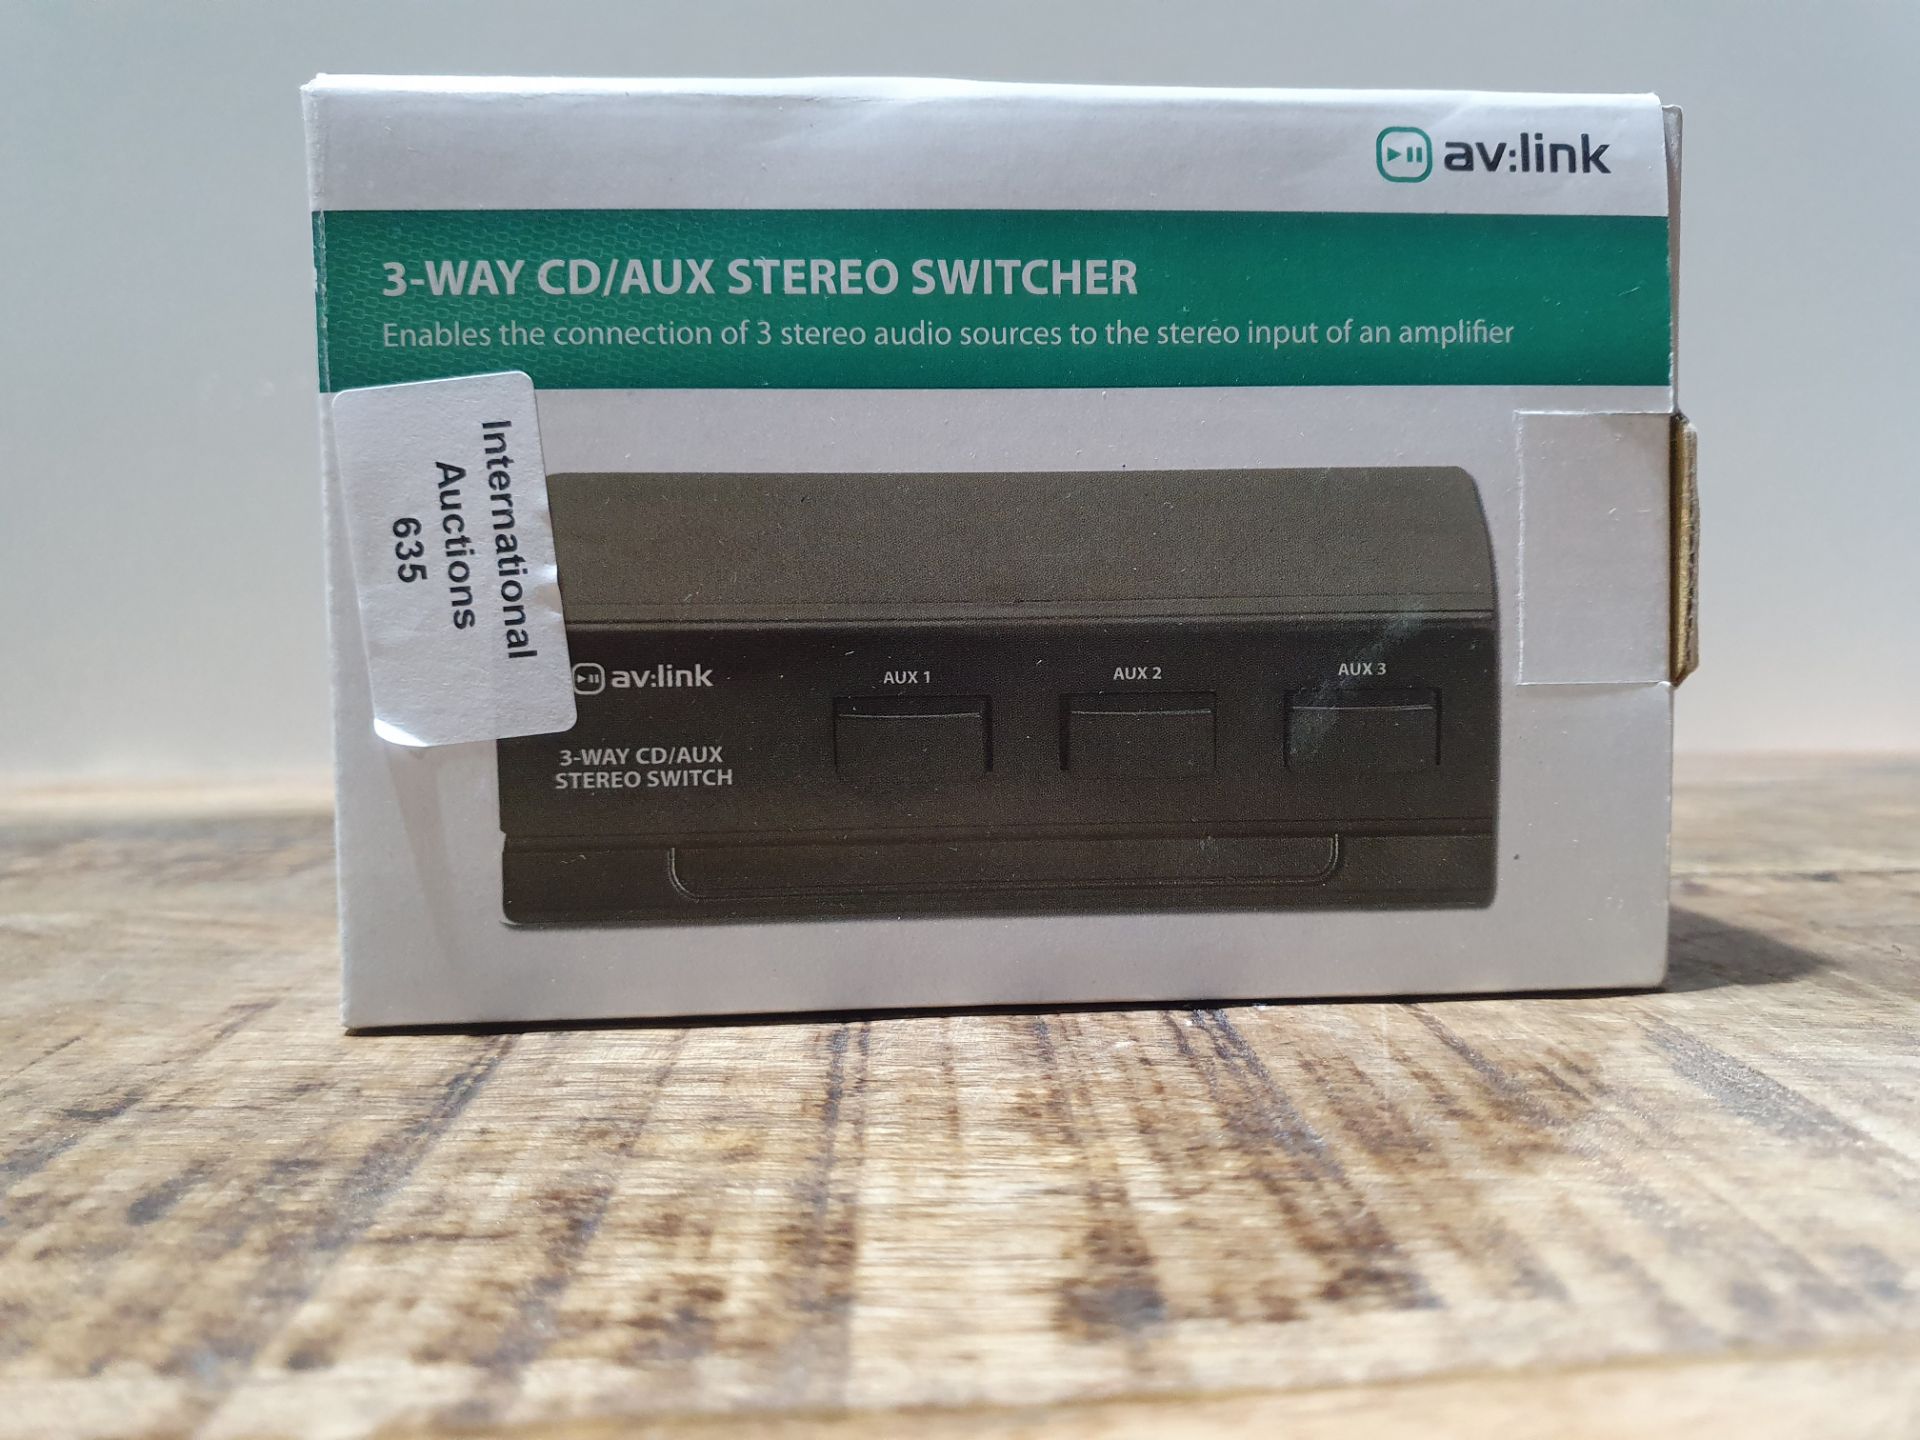 AV:LINK 3-WAY CD/AUX STEREO SWITCHER RRP £15 Condition ReportAppraisal Available on Request - All